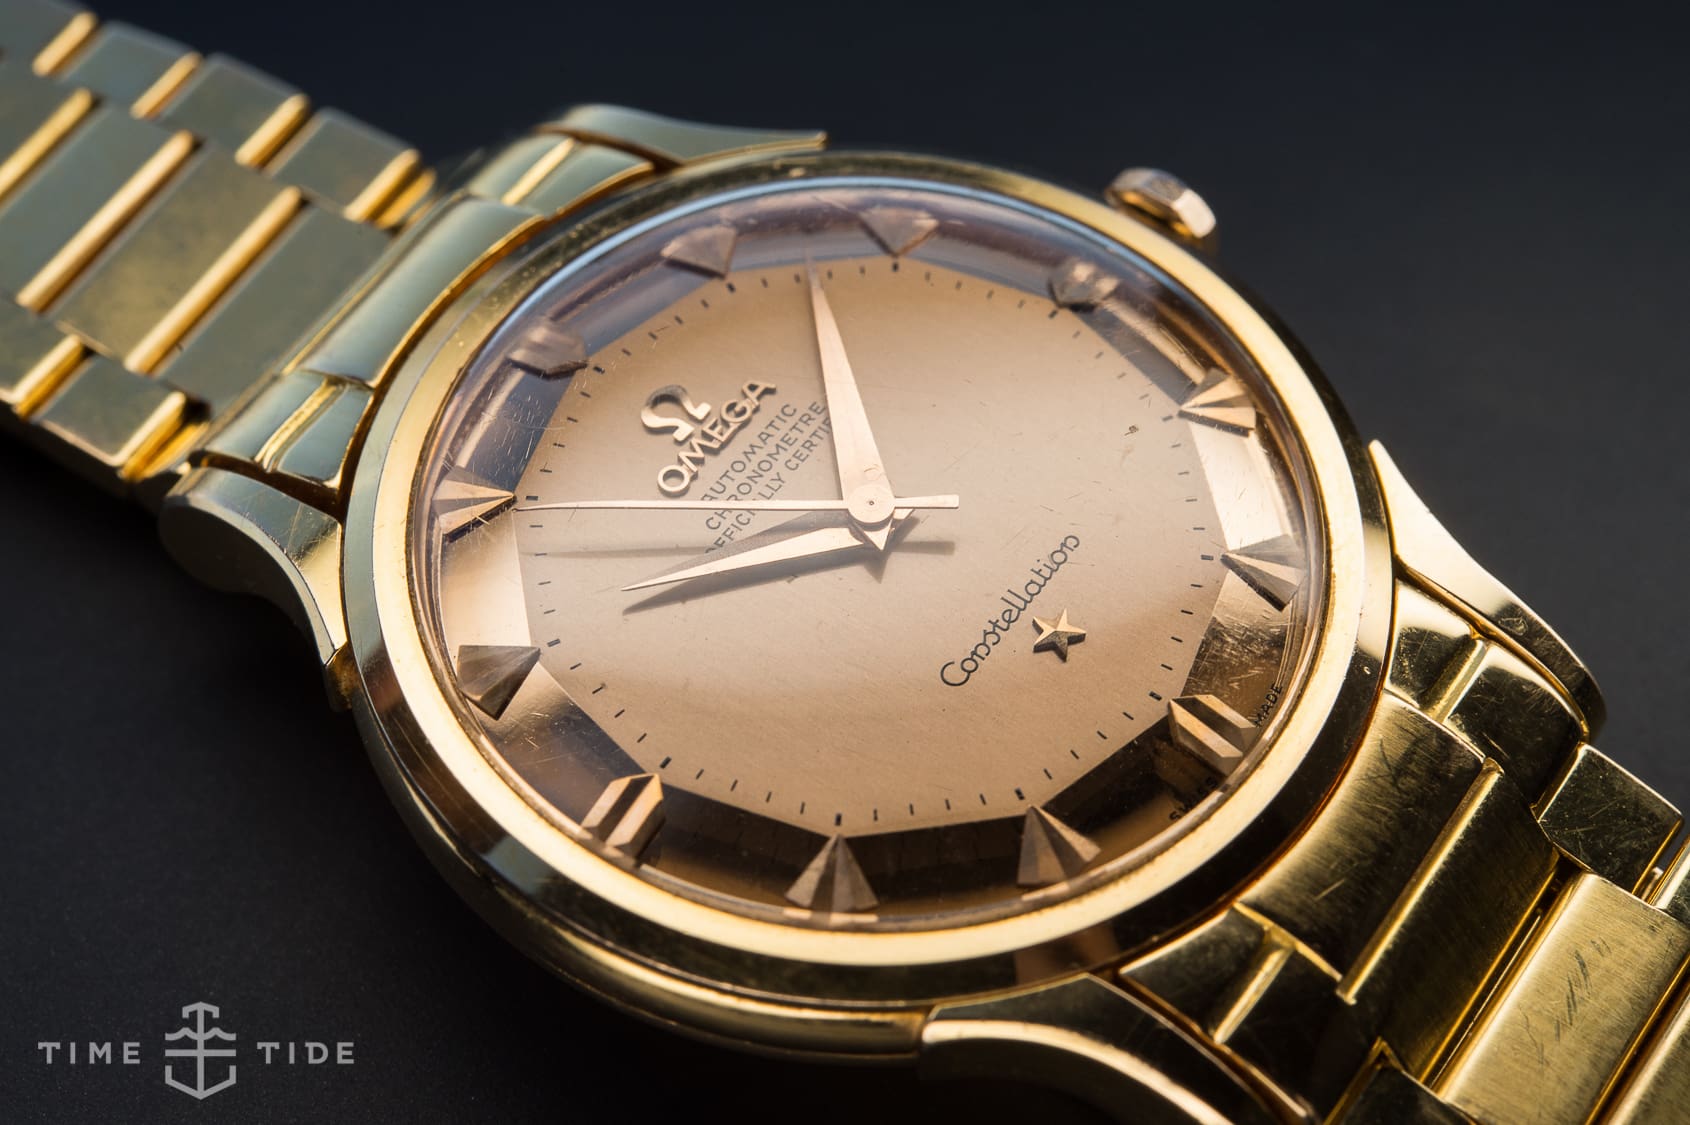 9 things you need to know before buying an Omega Constellation